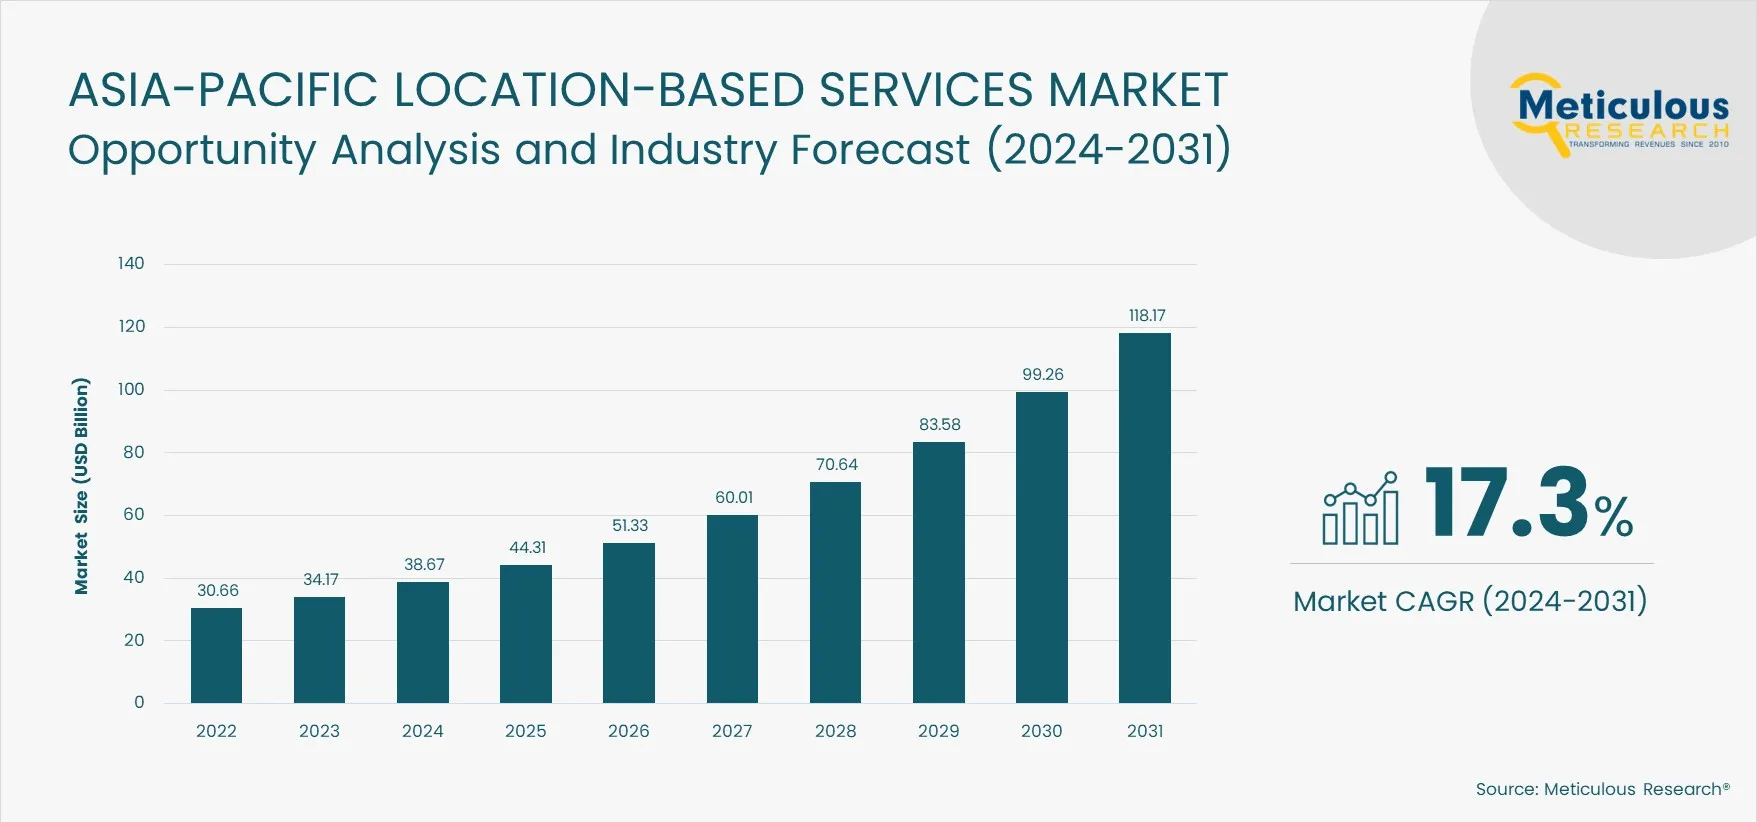 Asia-Pacific Location-based Services Market Bar Chart